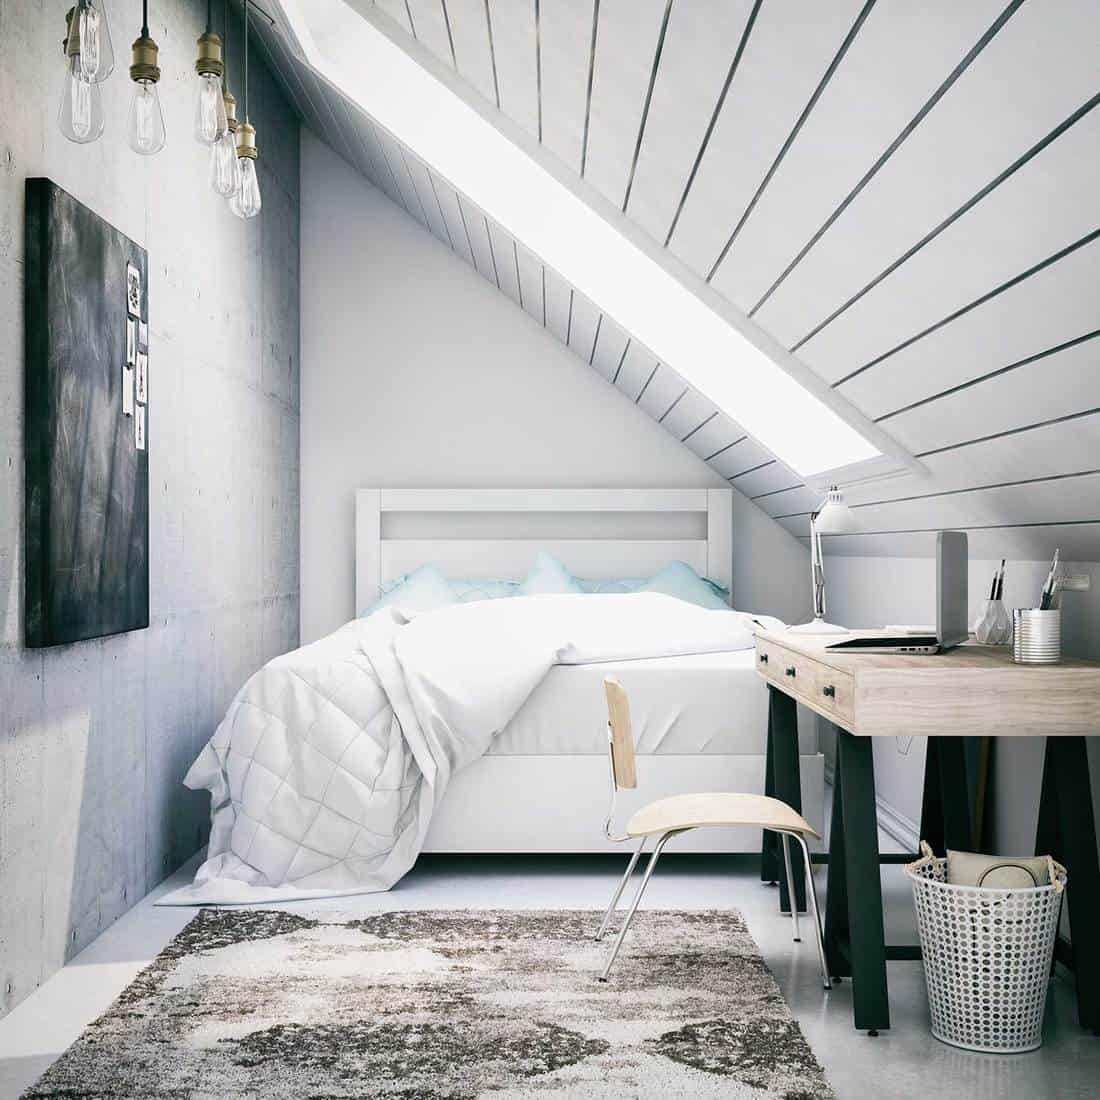 Black and white attic bedroom with abstract design area rug